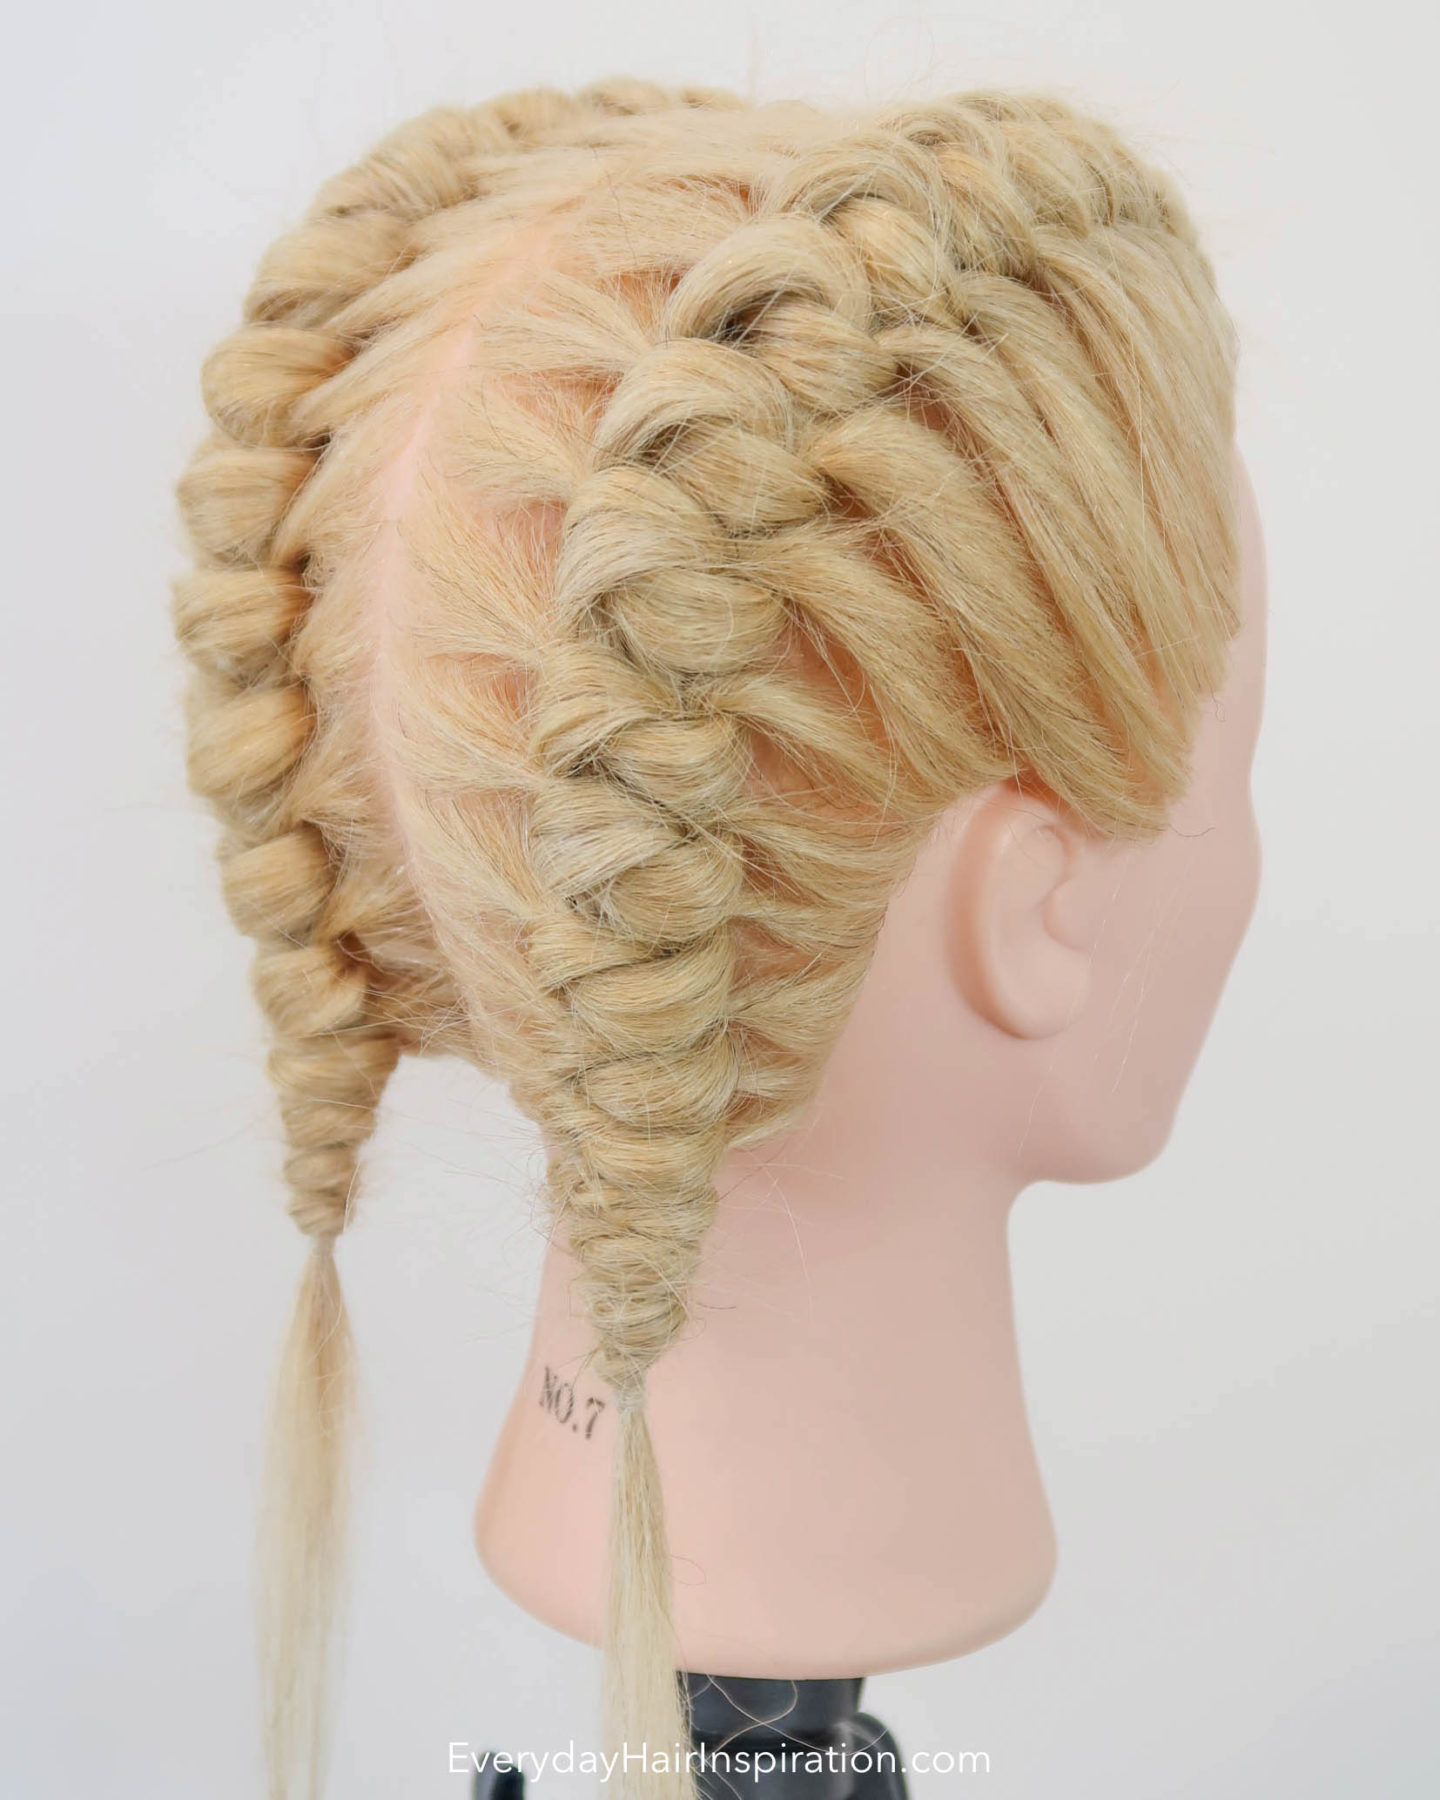 Blonde hairdresser head, seen from the side with double knot braids